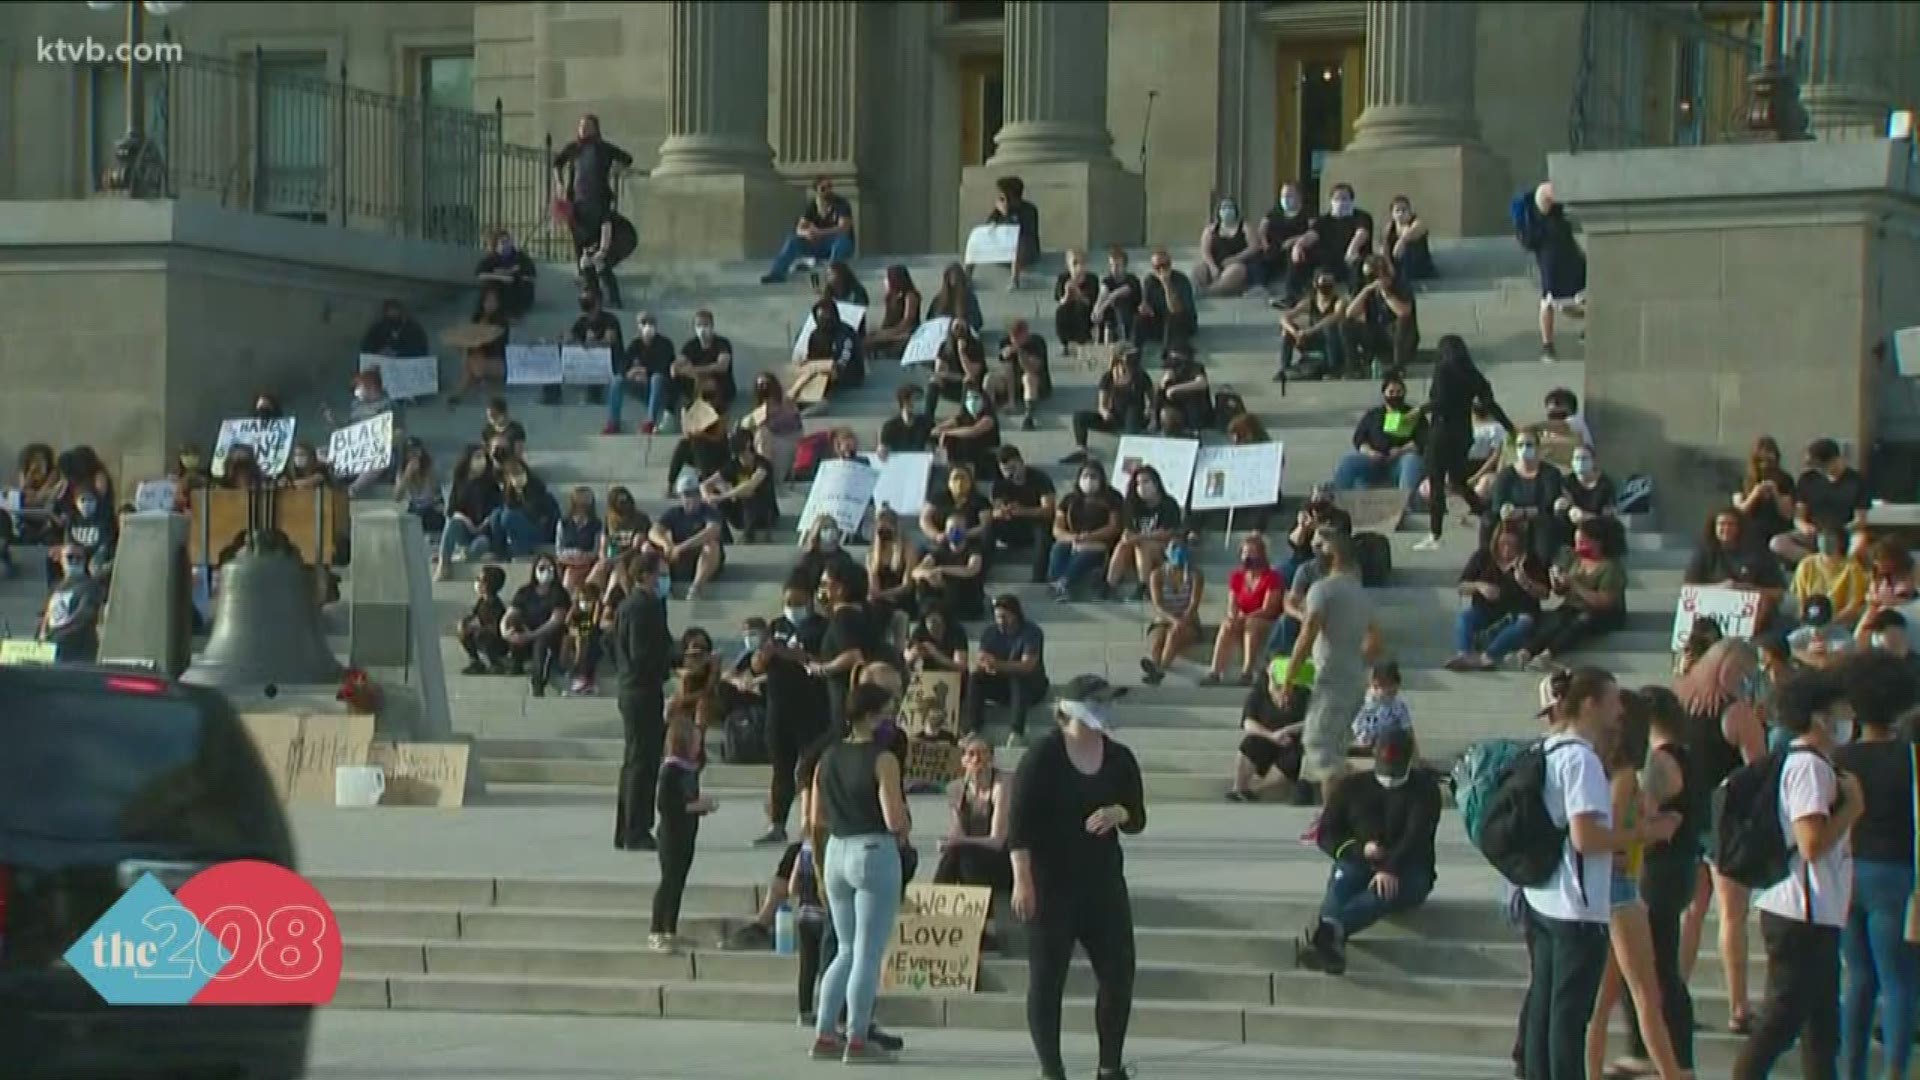 A Boise city councilwoman and one of the organizers of a massive vigil at the Statehouse both say it's not enough to just protest - you must be prepared to do more.